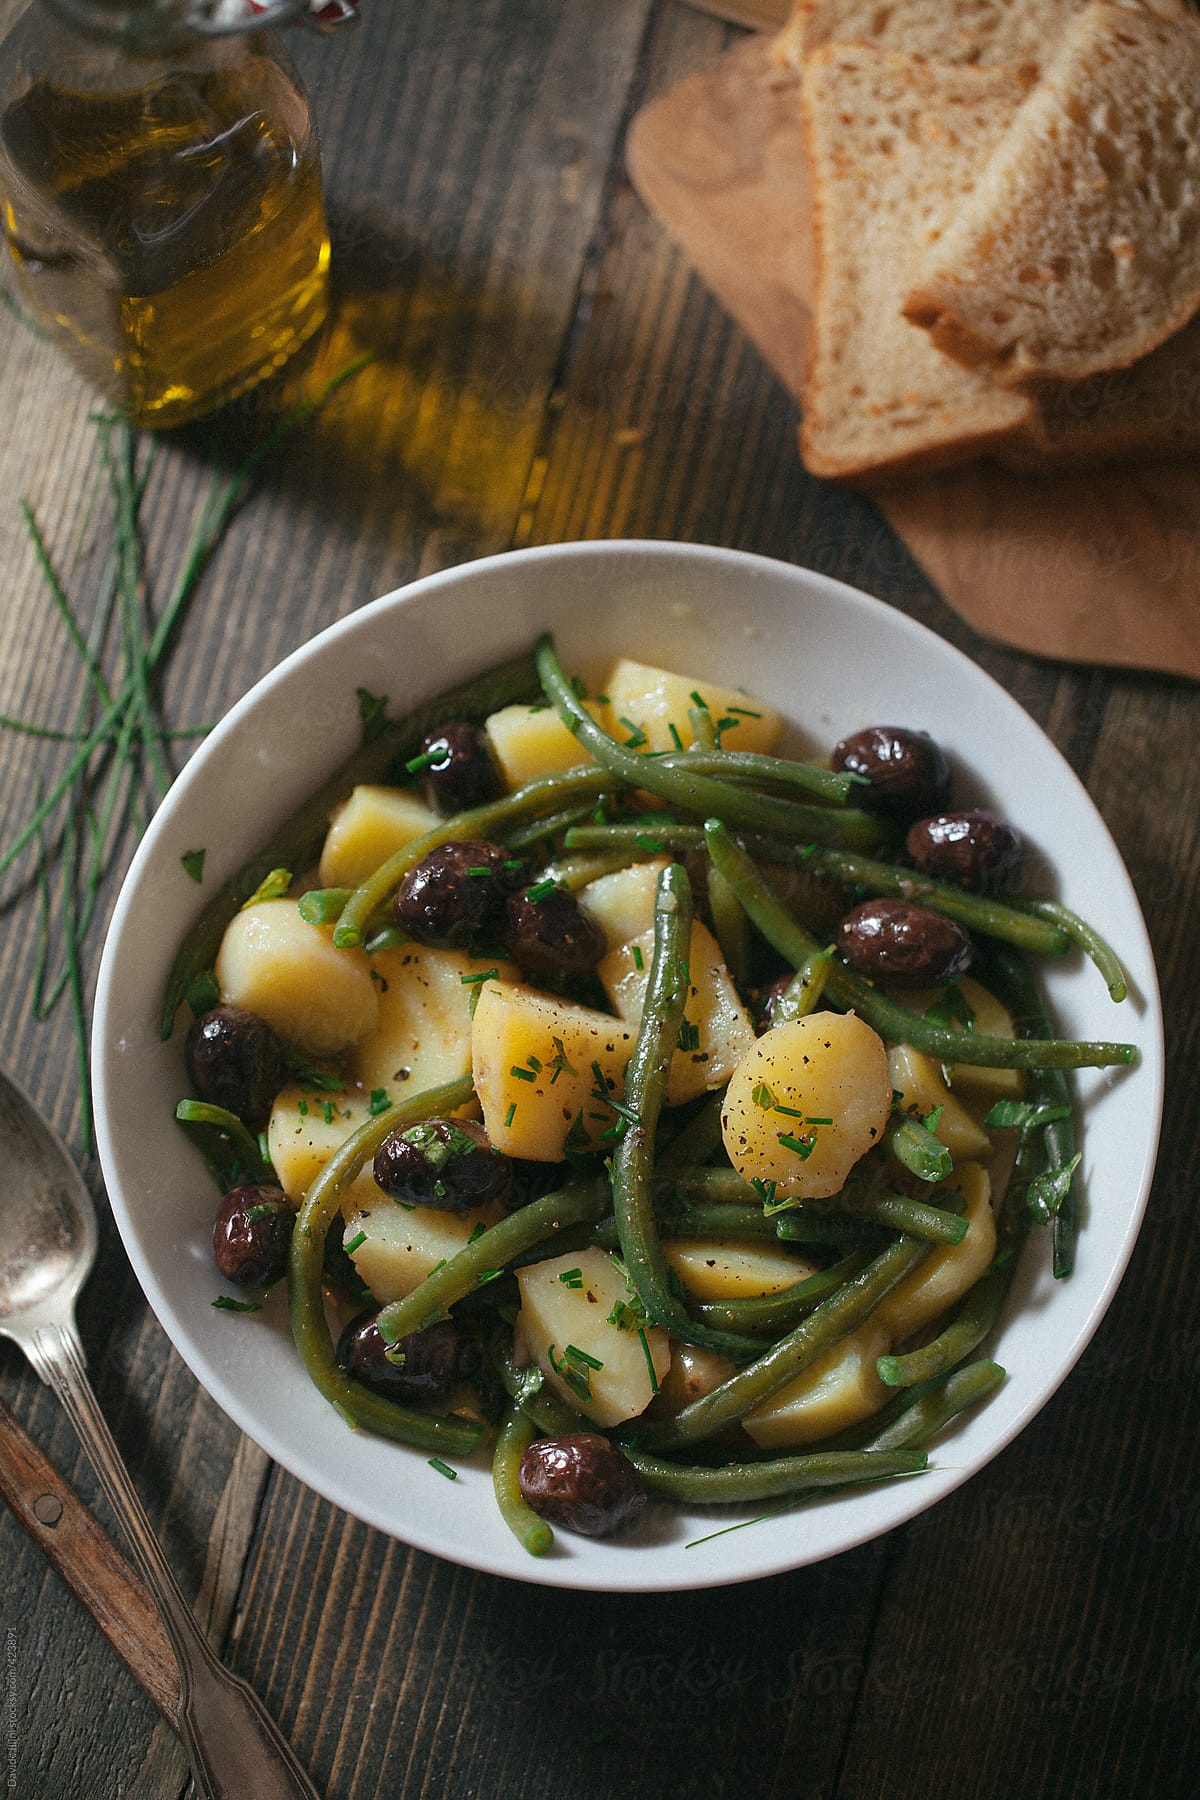 Vegan salad with potatoes green beans and black olives.